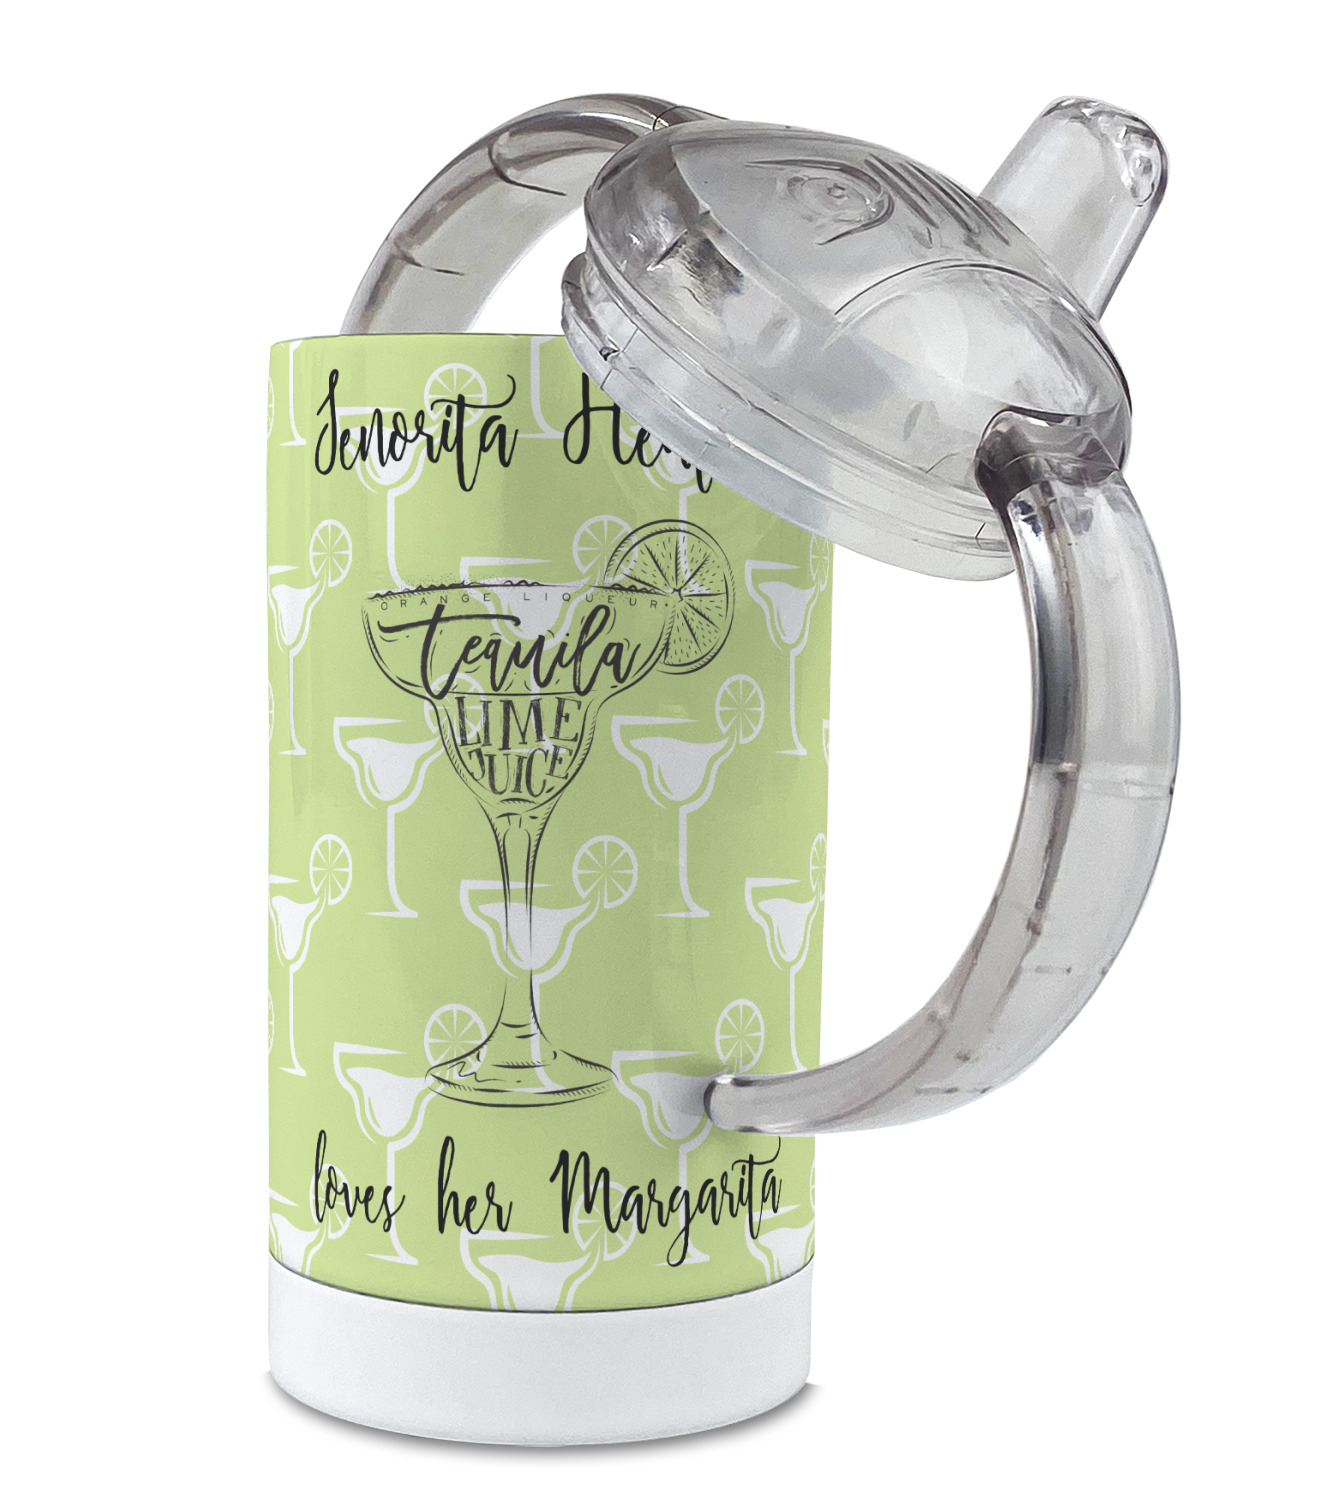 https://www.youcustomizeit.com/common/MAKE/1622723/Margarita-Lover-12-oz-Stainless-Steel-Sippy-Cups-Top-Off.jpg?lm=1671155721